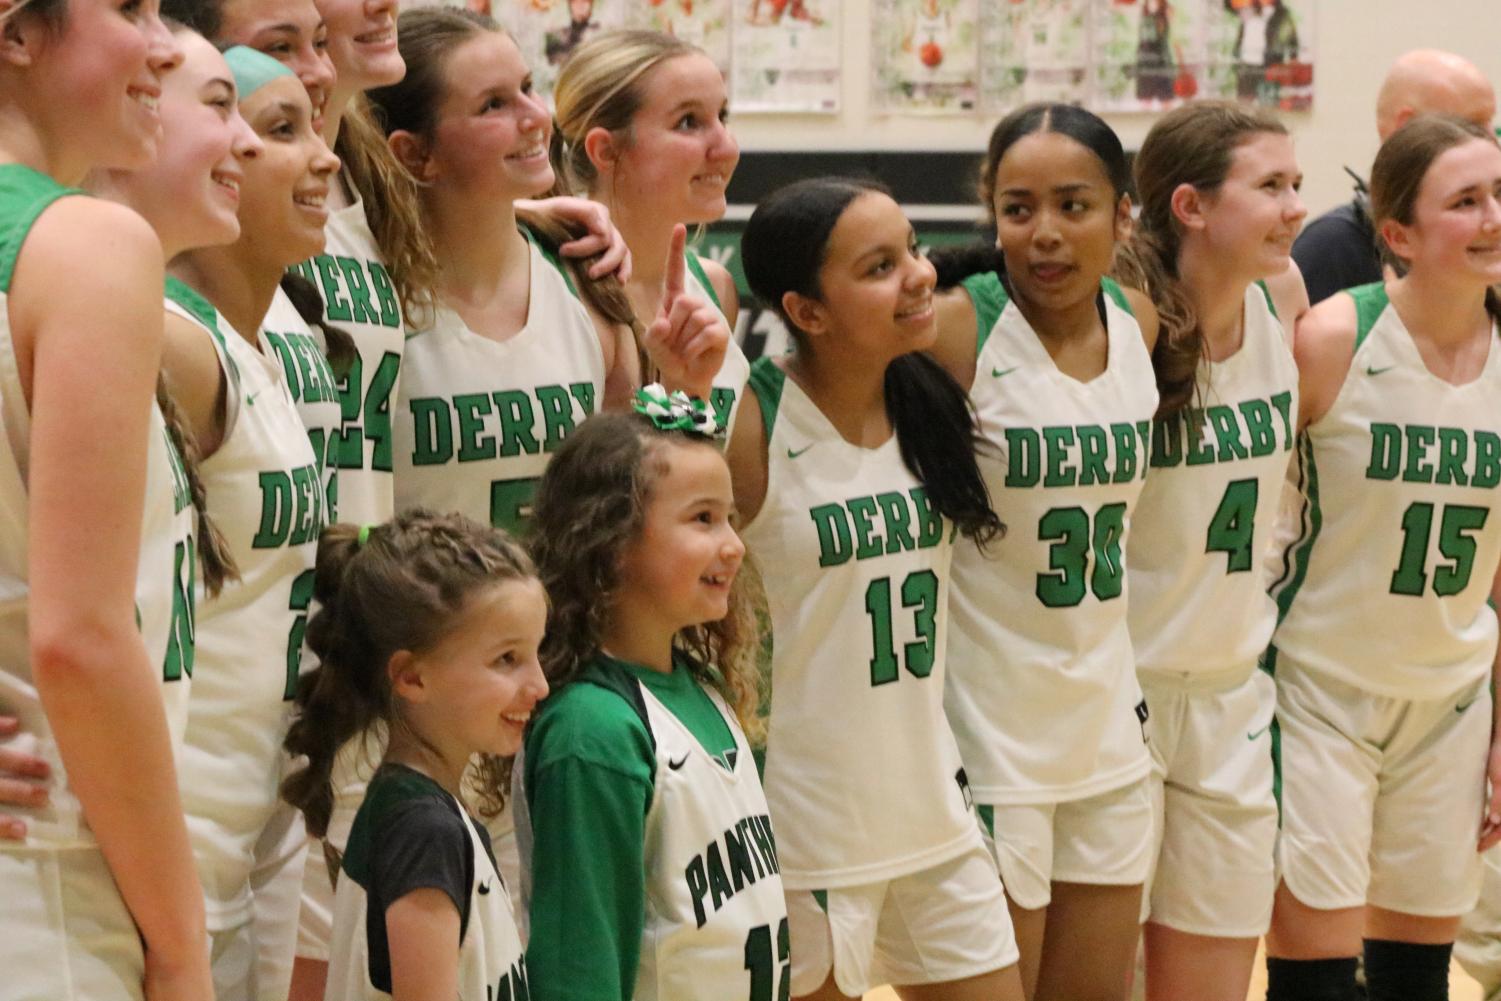 Girls+basketball+sub-state+semi+finals+V.+Lawrence+Free+State+%28Photos+by+Alexis+King%29